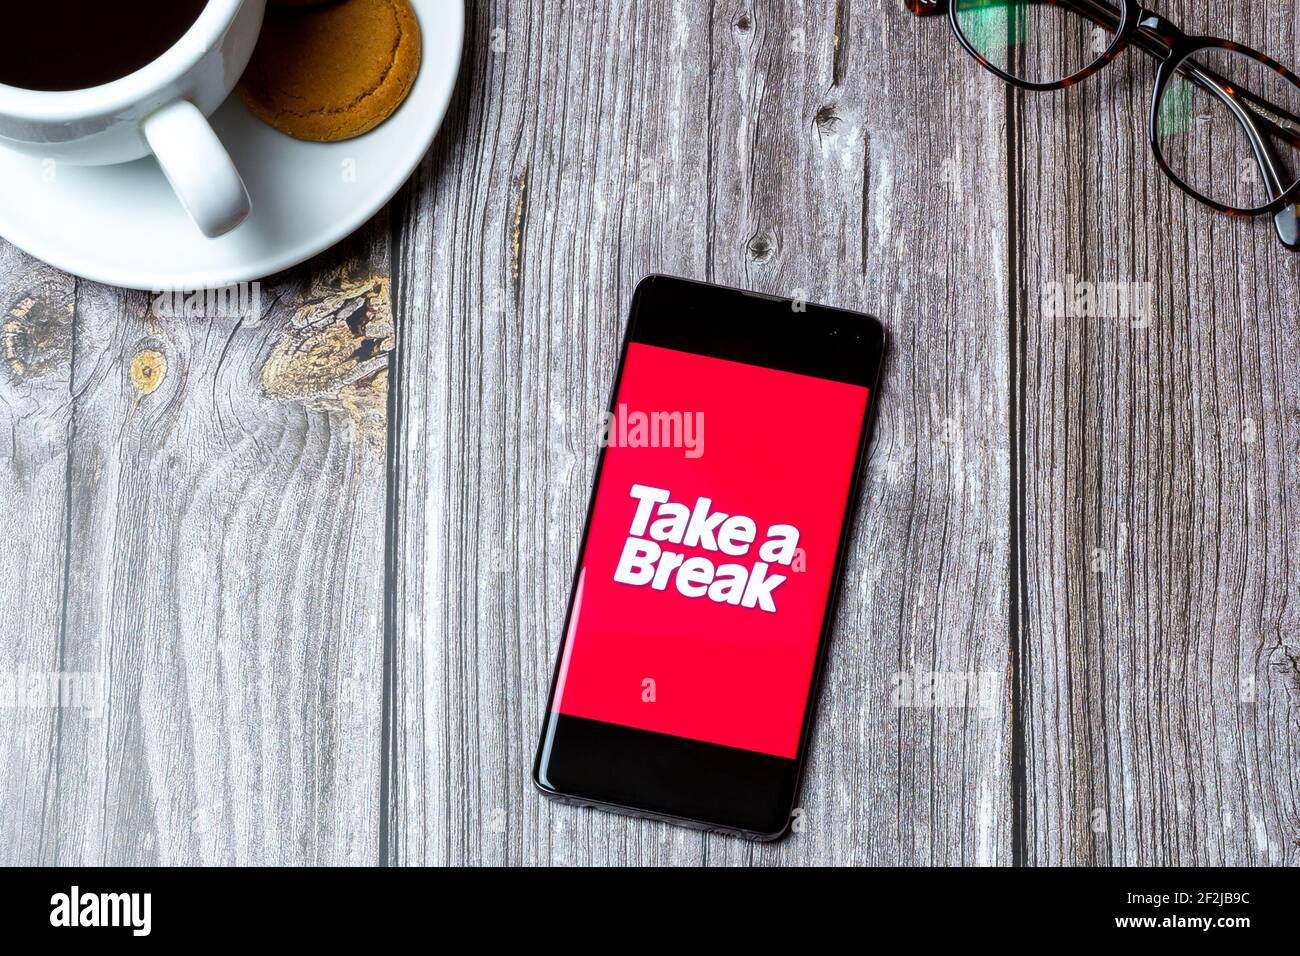 A Mobile phone or cell phone laid on a wooden table with the Take a Break app open on screen Stock Photo